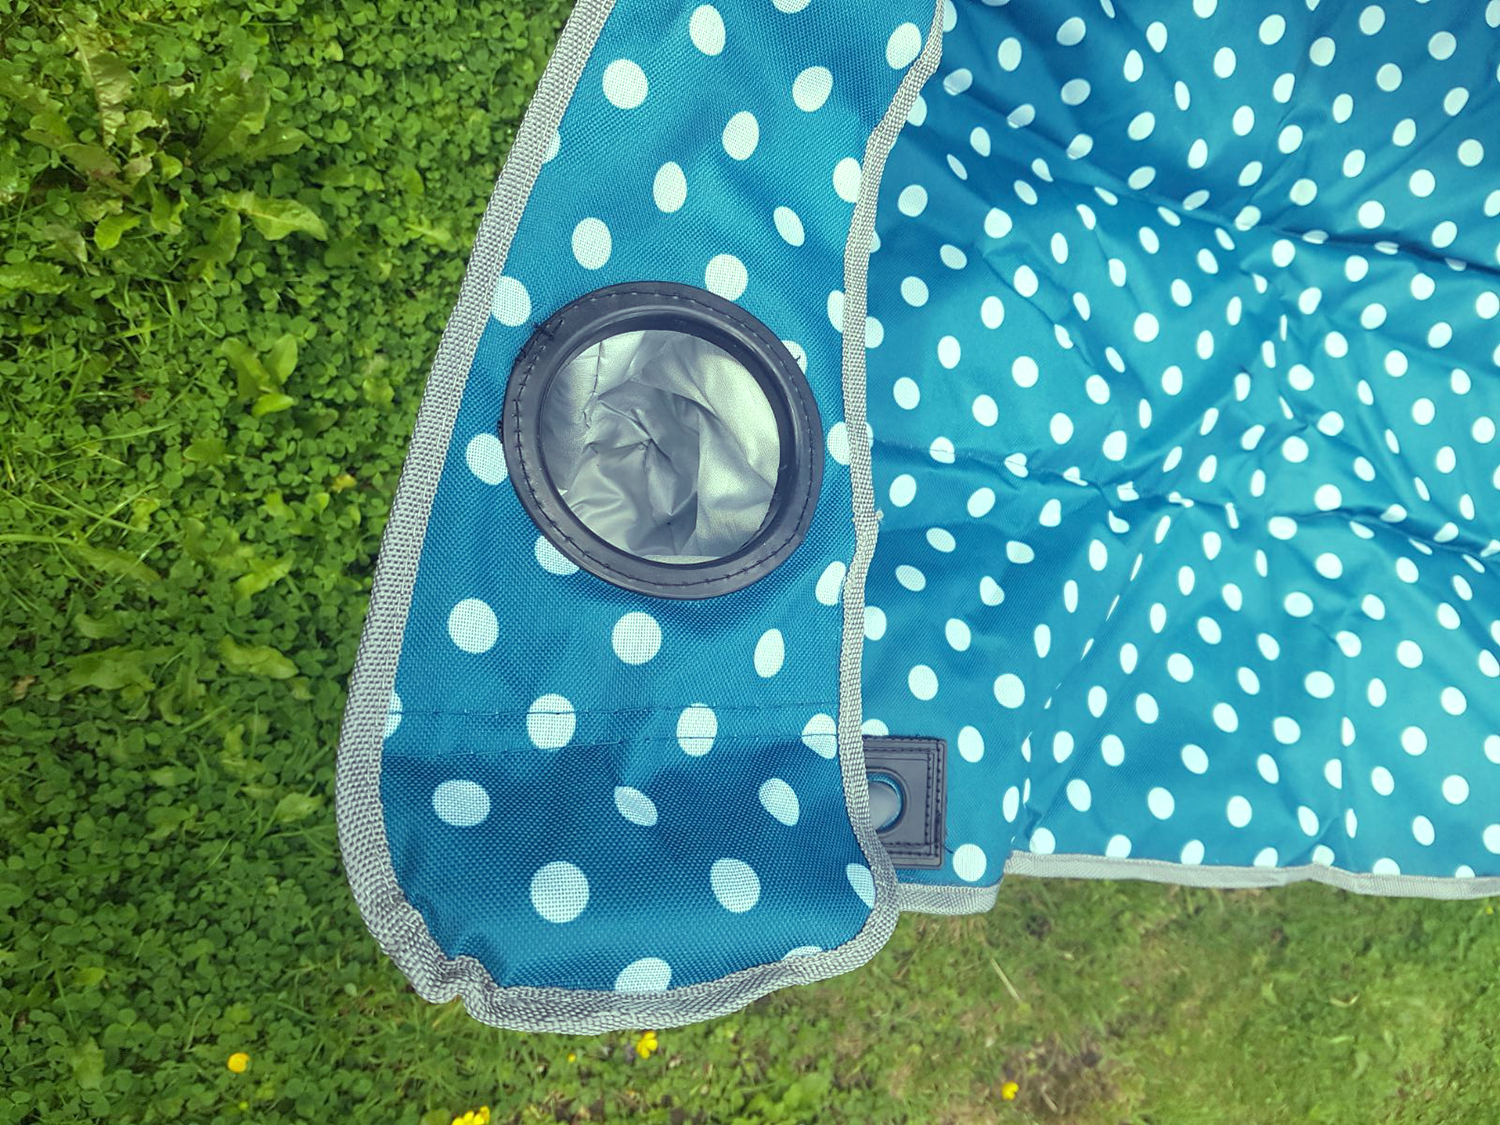 Deluxe polka dot camping chair